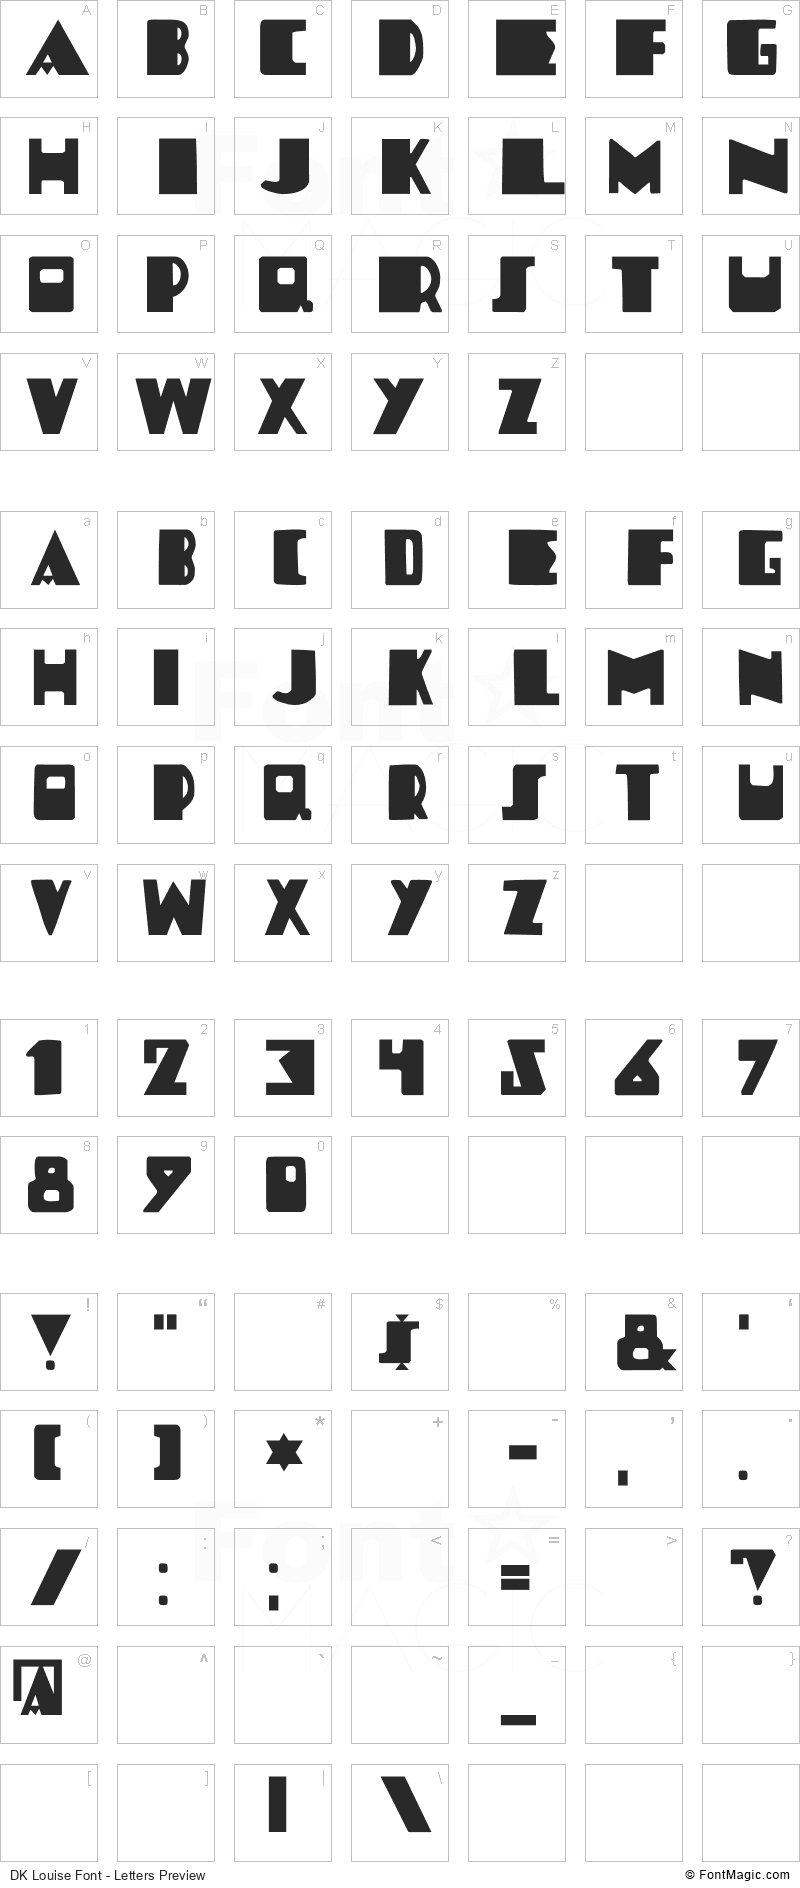 DK Louise Font - All Latters Preview Chart